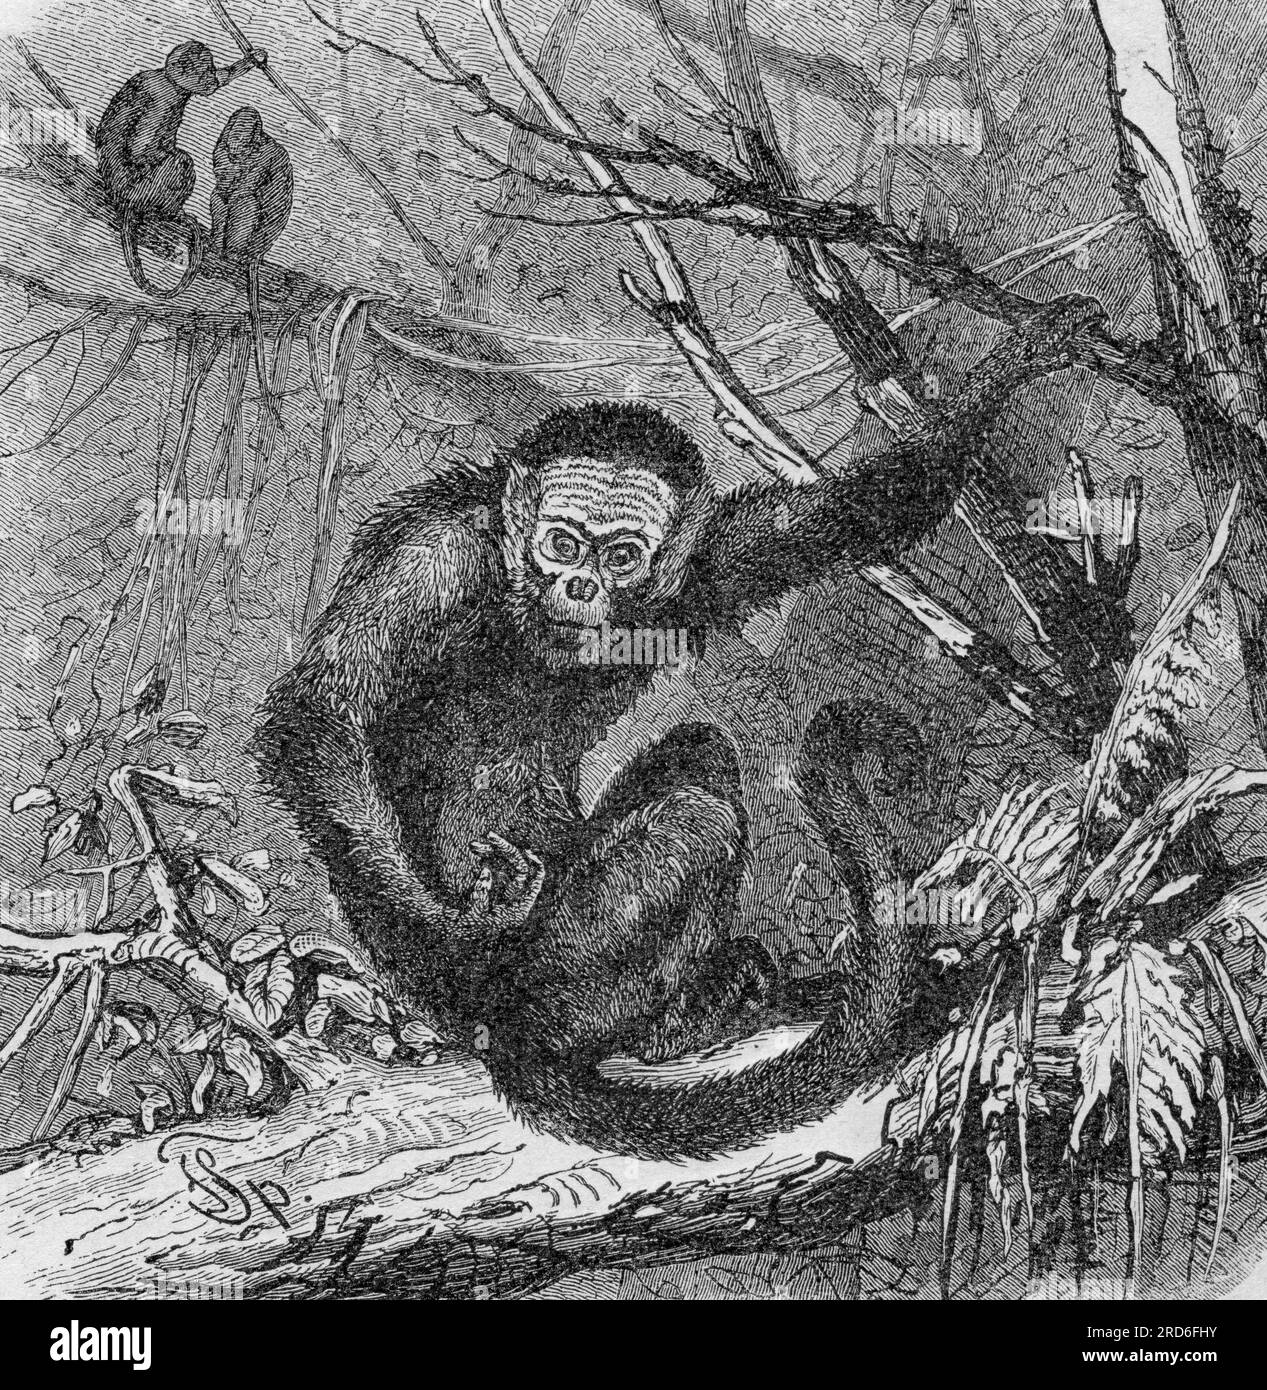 zoology / animals, monkey, Colombian white-faced capuchin (Cebus capucinus), wood engraving, 19th century, ARTIST'S COPYRIGHT HAS NOT TO BE CLEARED Stock Photo